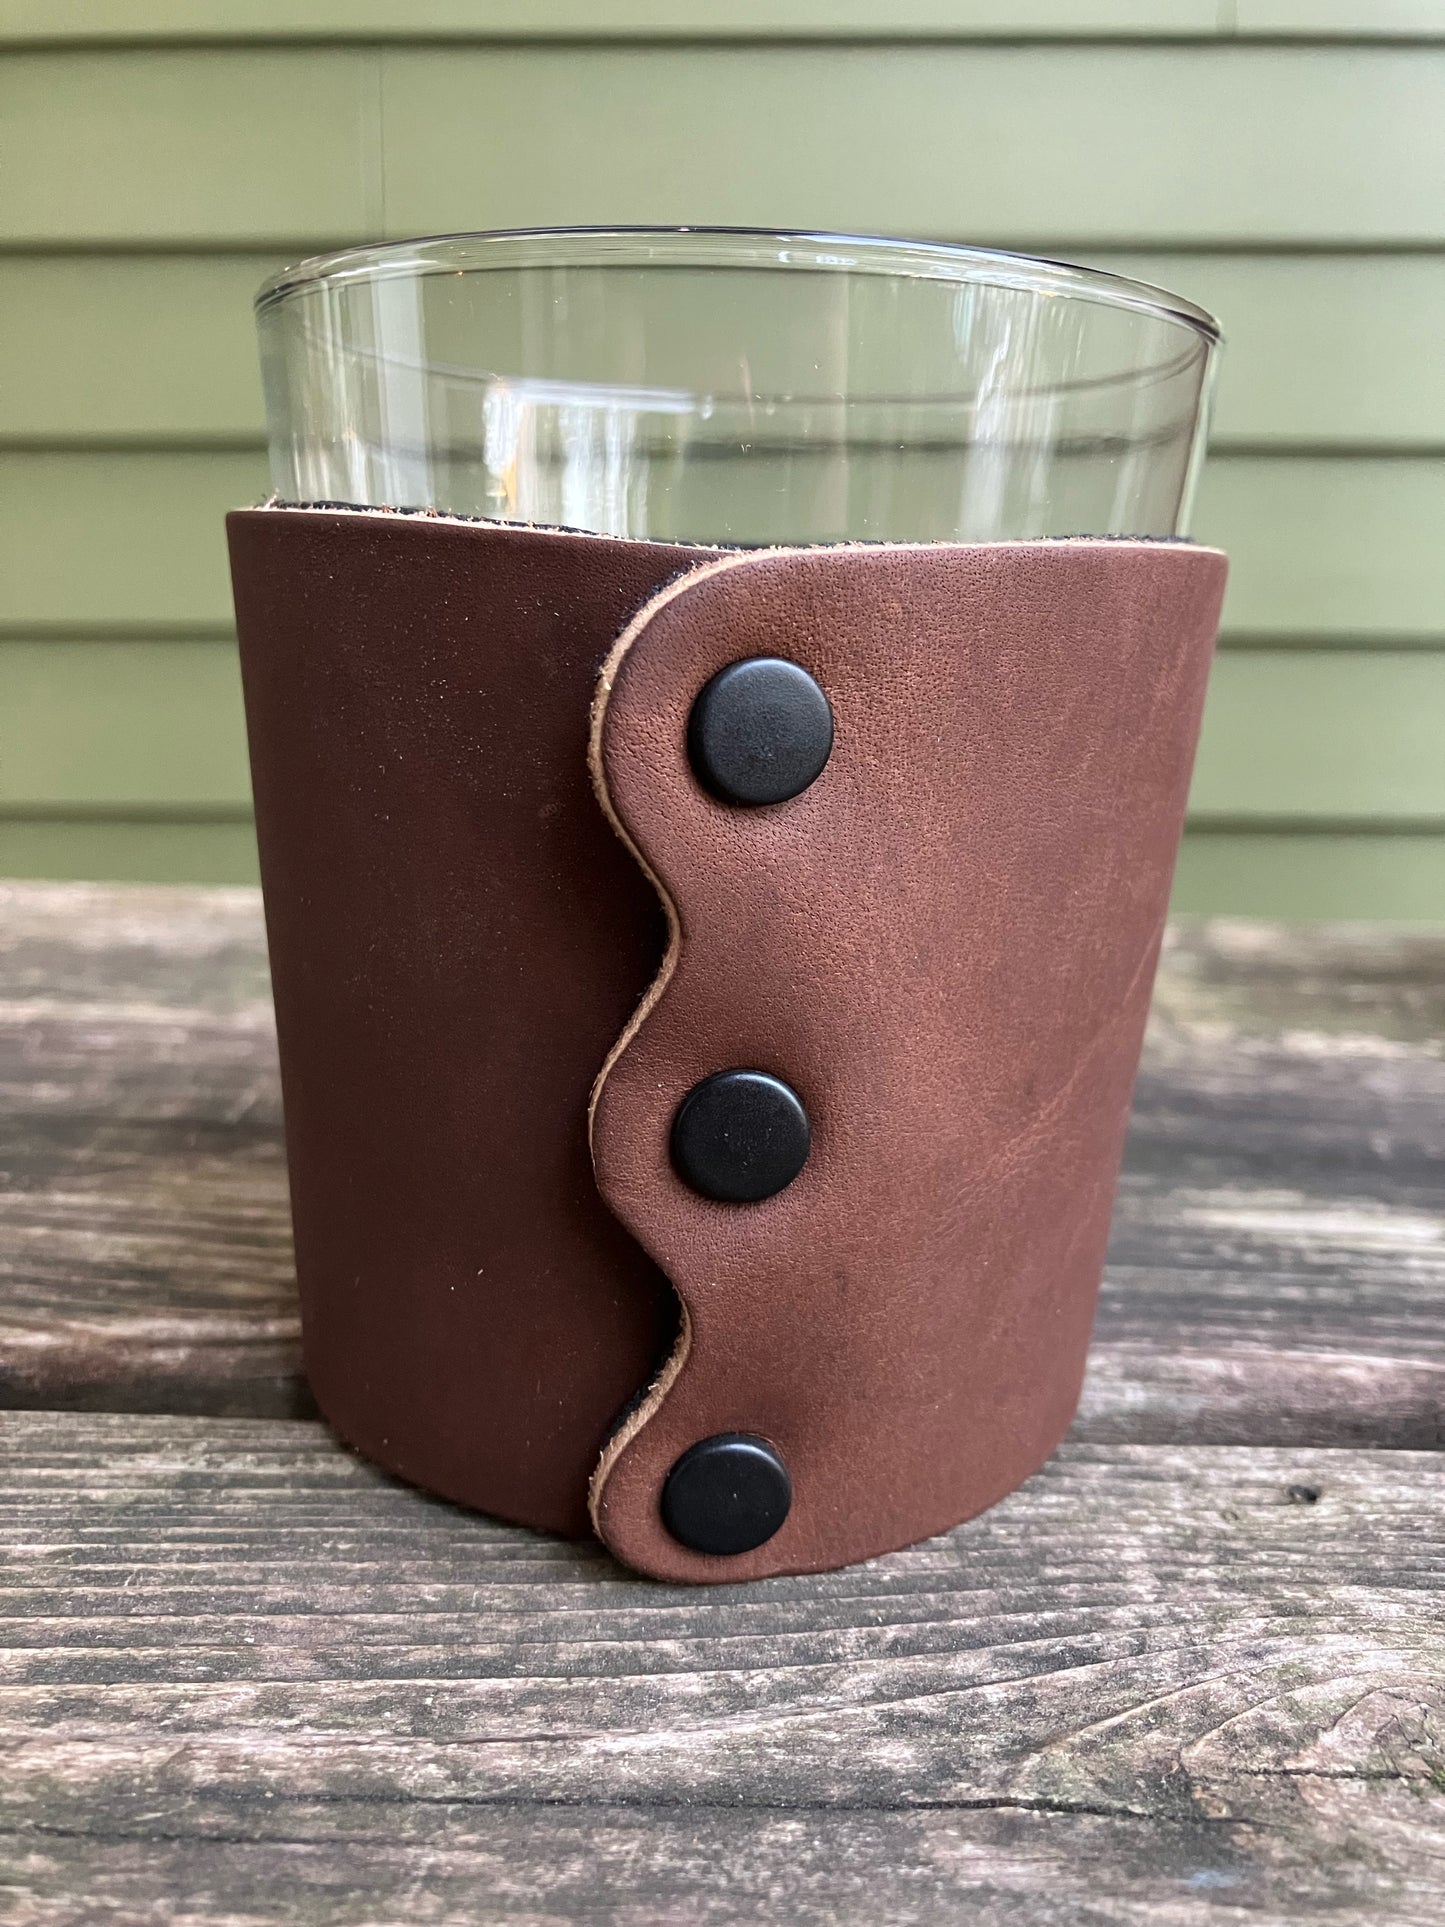 Leather Wrapped Whiskey Glass - Keep Calm and Party On